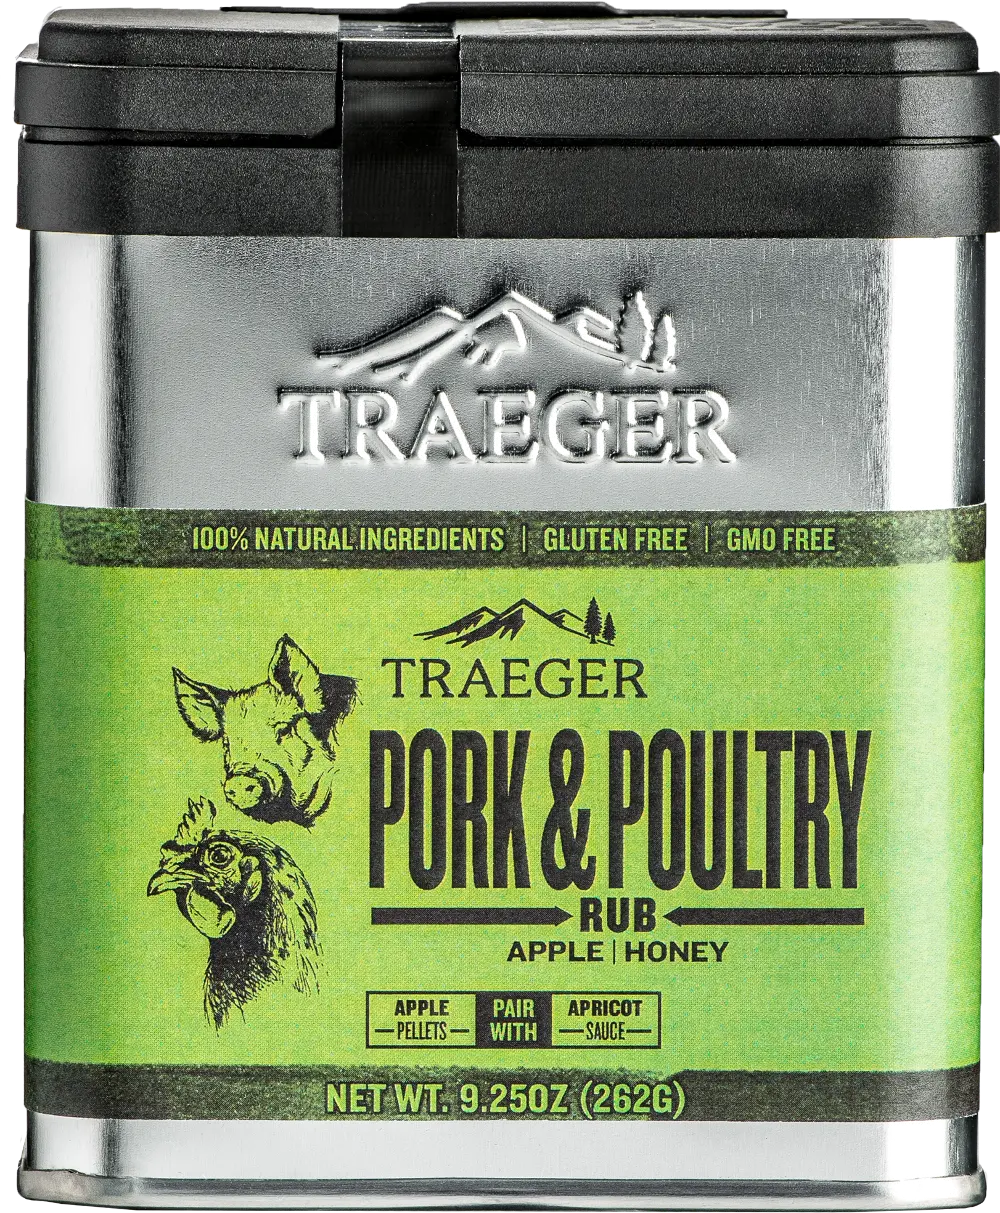 SPC171 Traeger Grill Pork and Poultry Rub-1